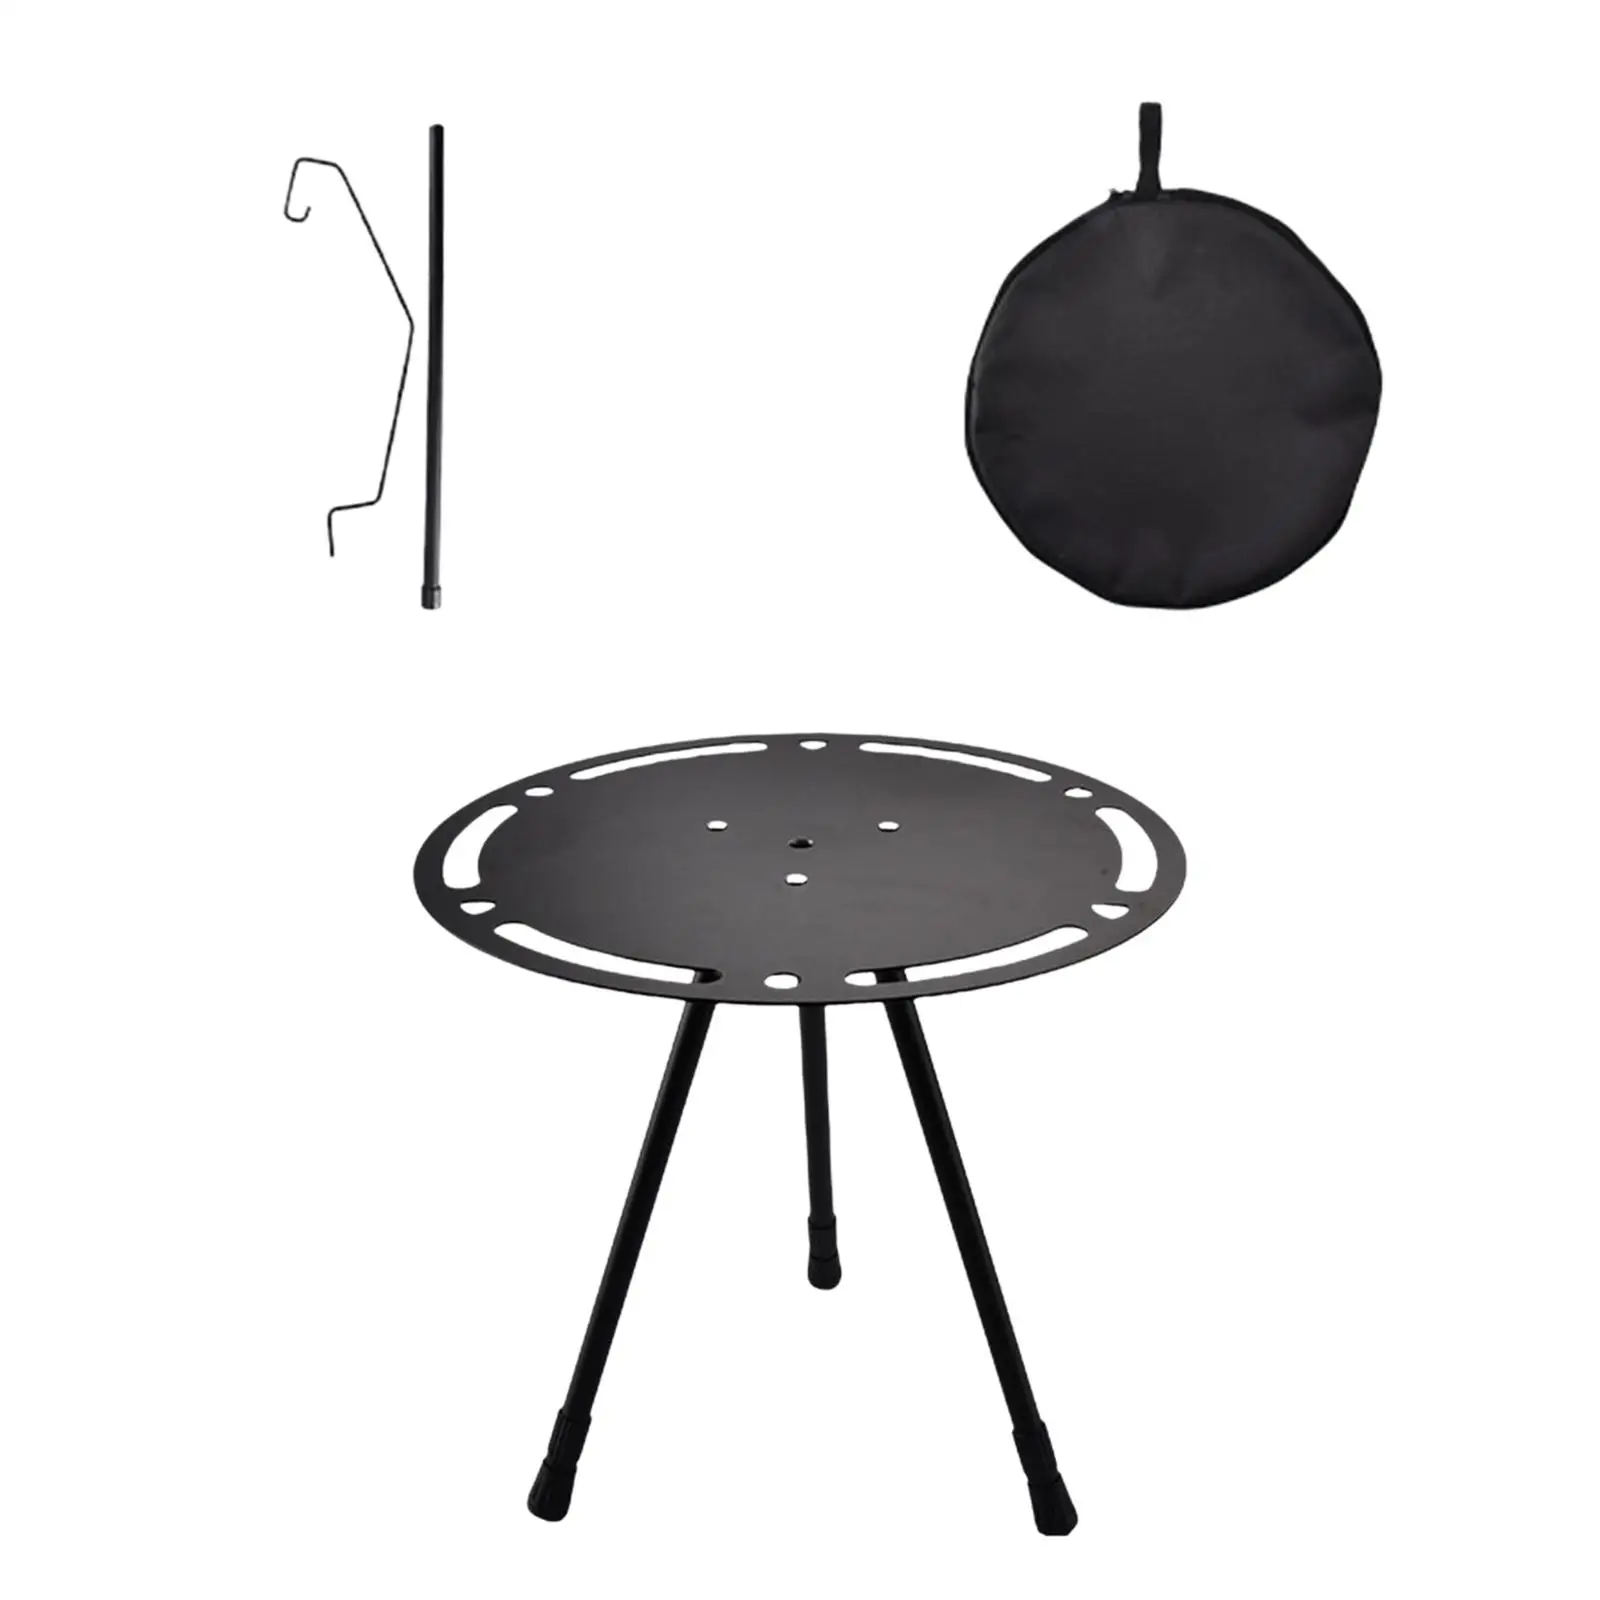 Camping Table, Portable Small Round Table, Retractable Legs with Lamp Pole Outdoor Folding Table for Travel Camping Equipment